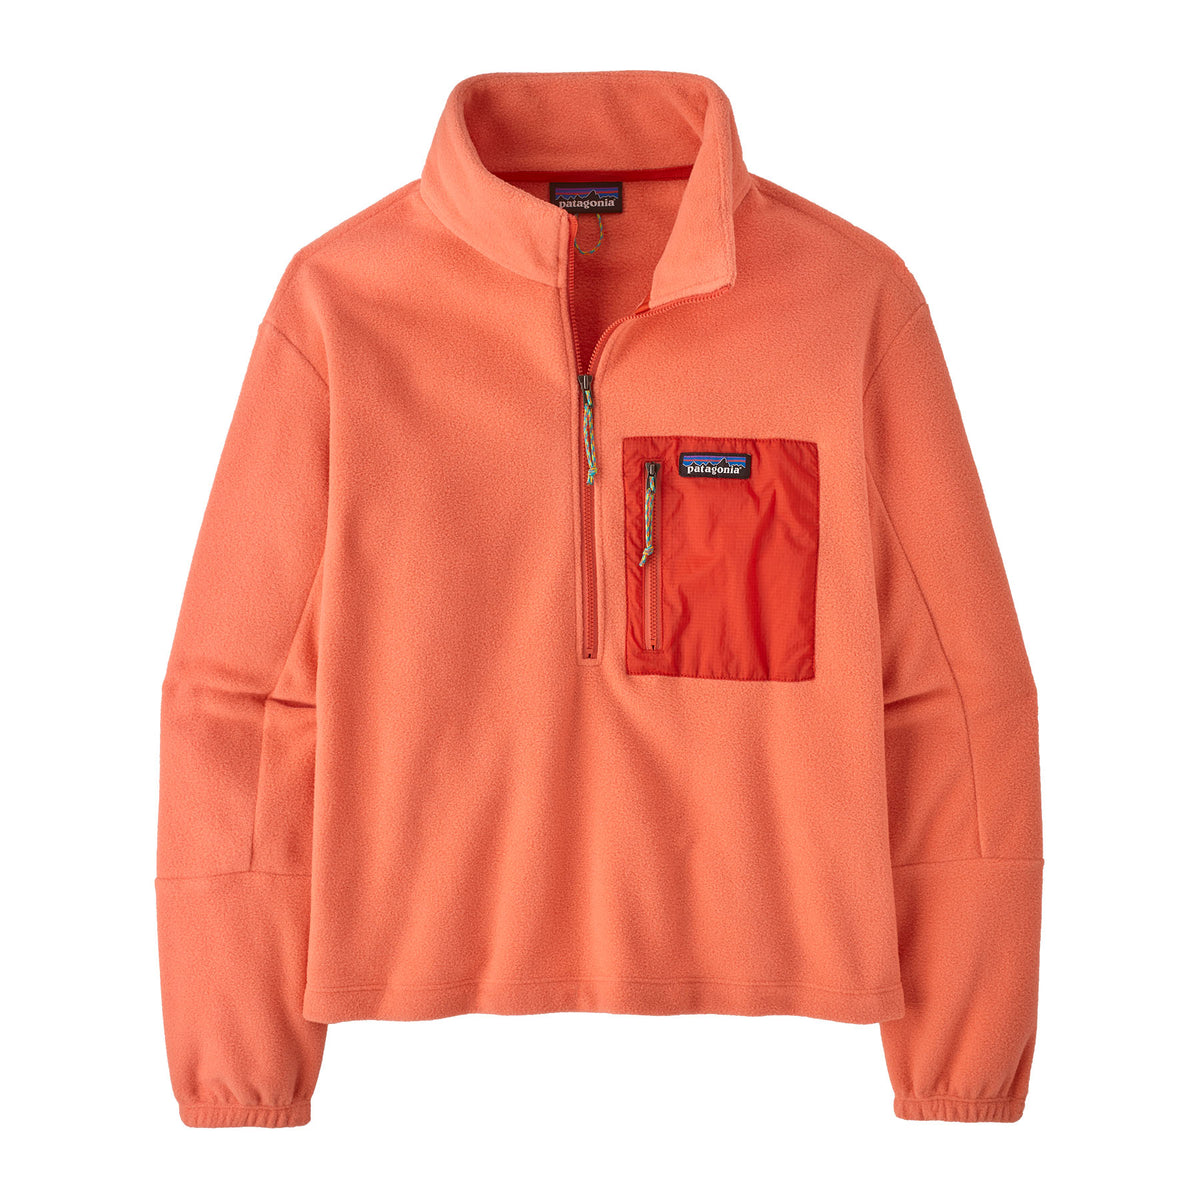 Our Favorite Patagonia Fleece Just Got Better